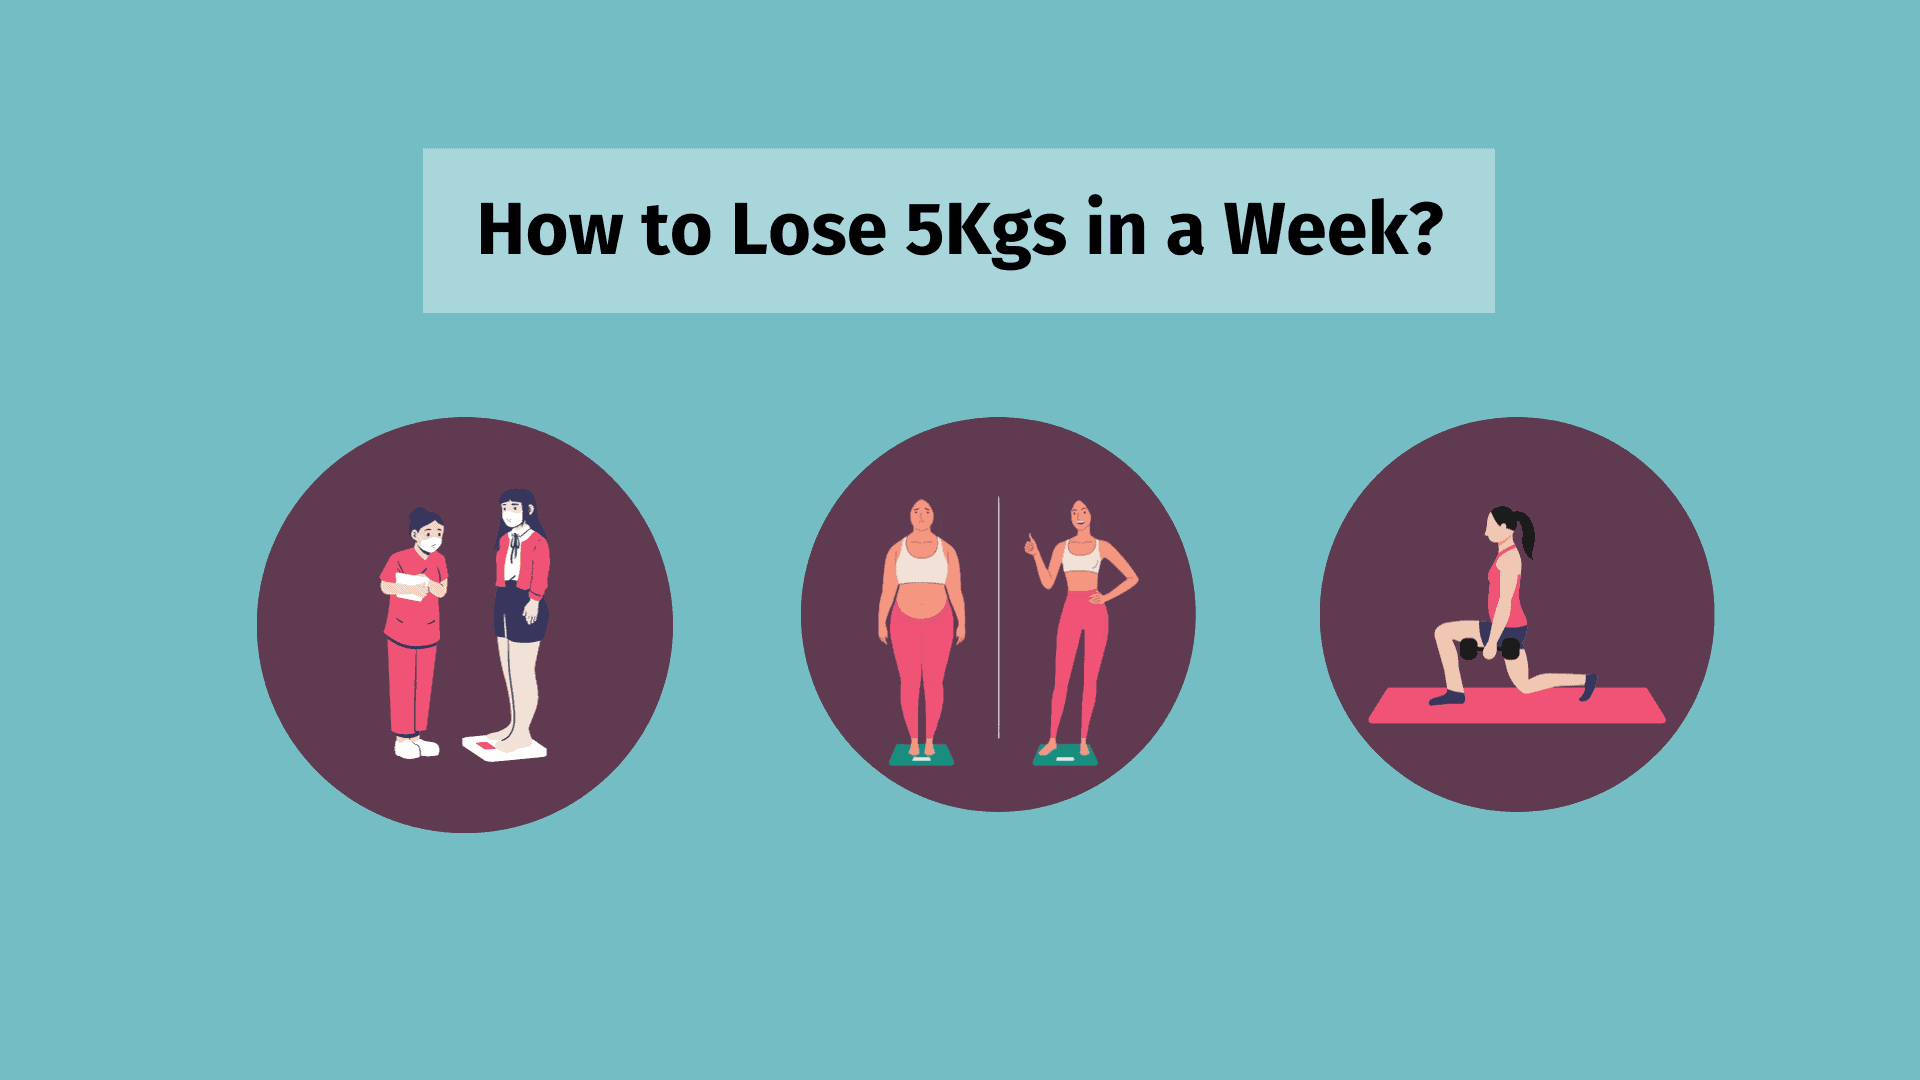 How can I lose 5 kg in a week?